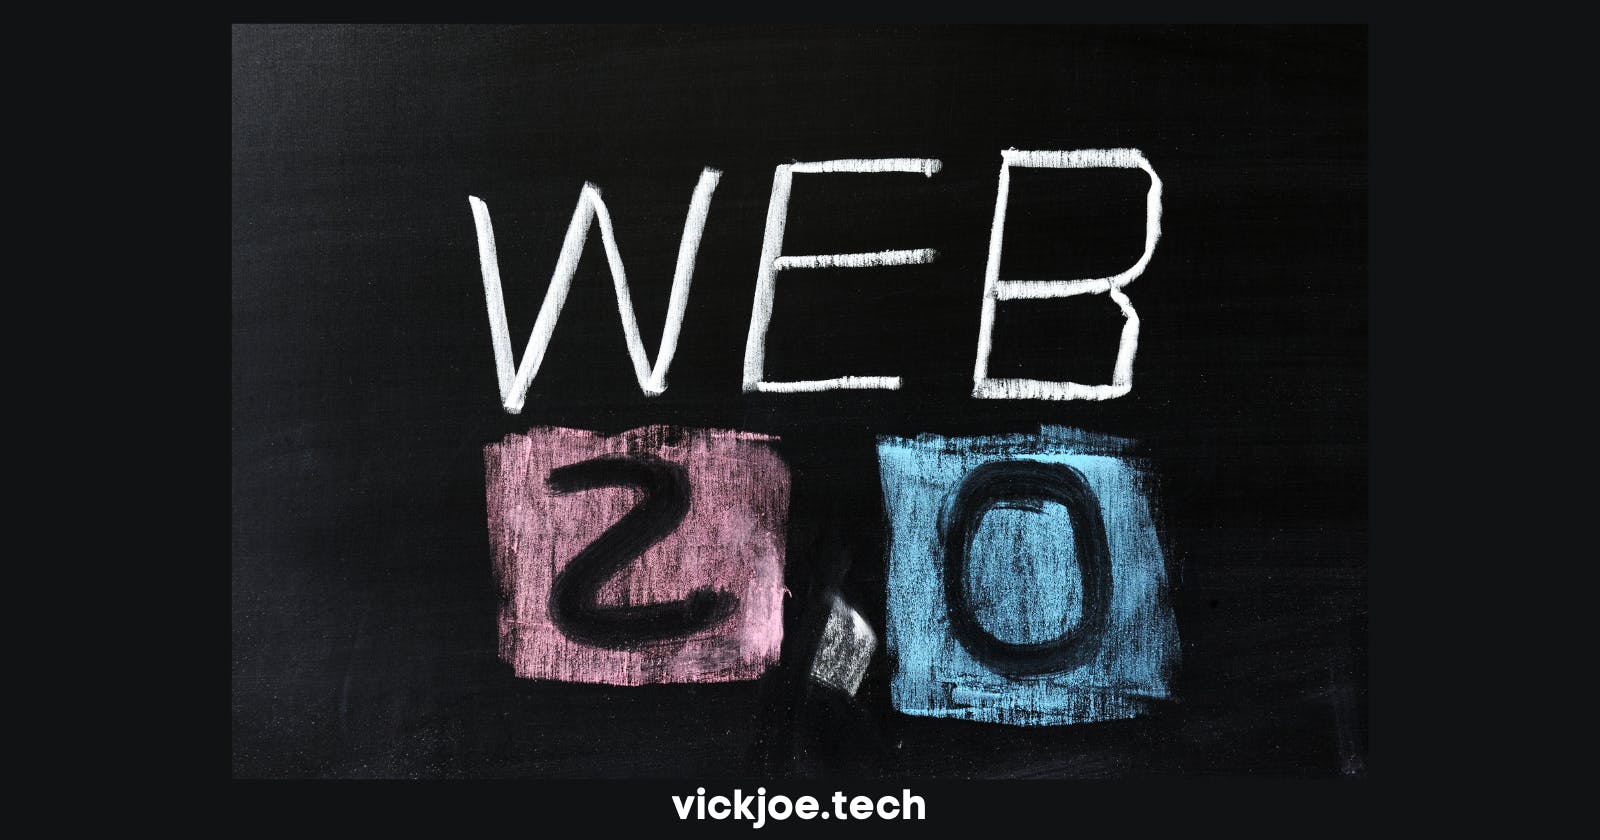 It is now time to understand Web 2.0 before we delve into Web 3.0.